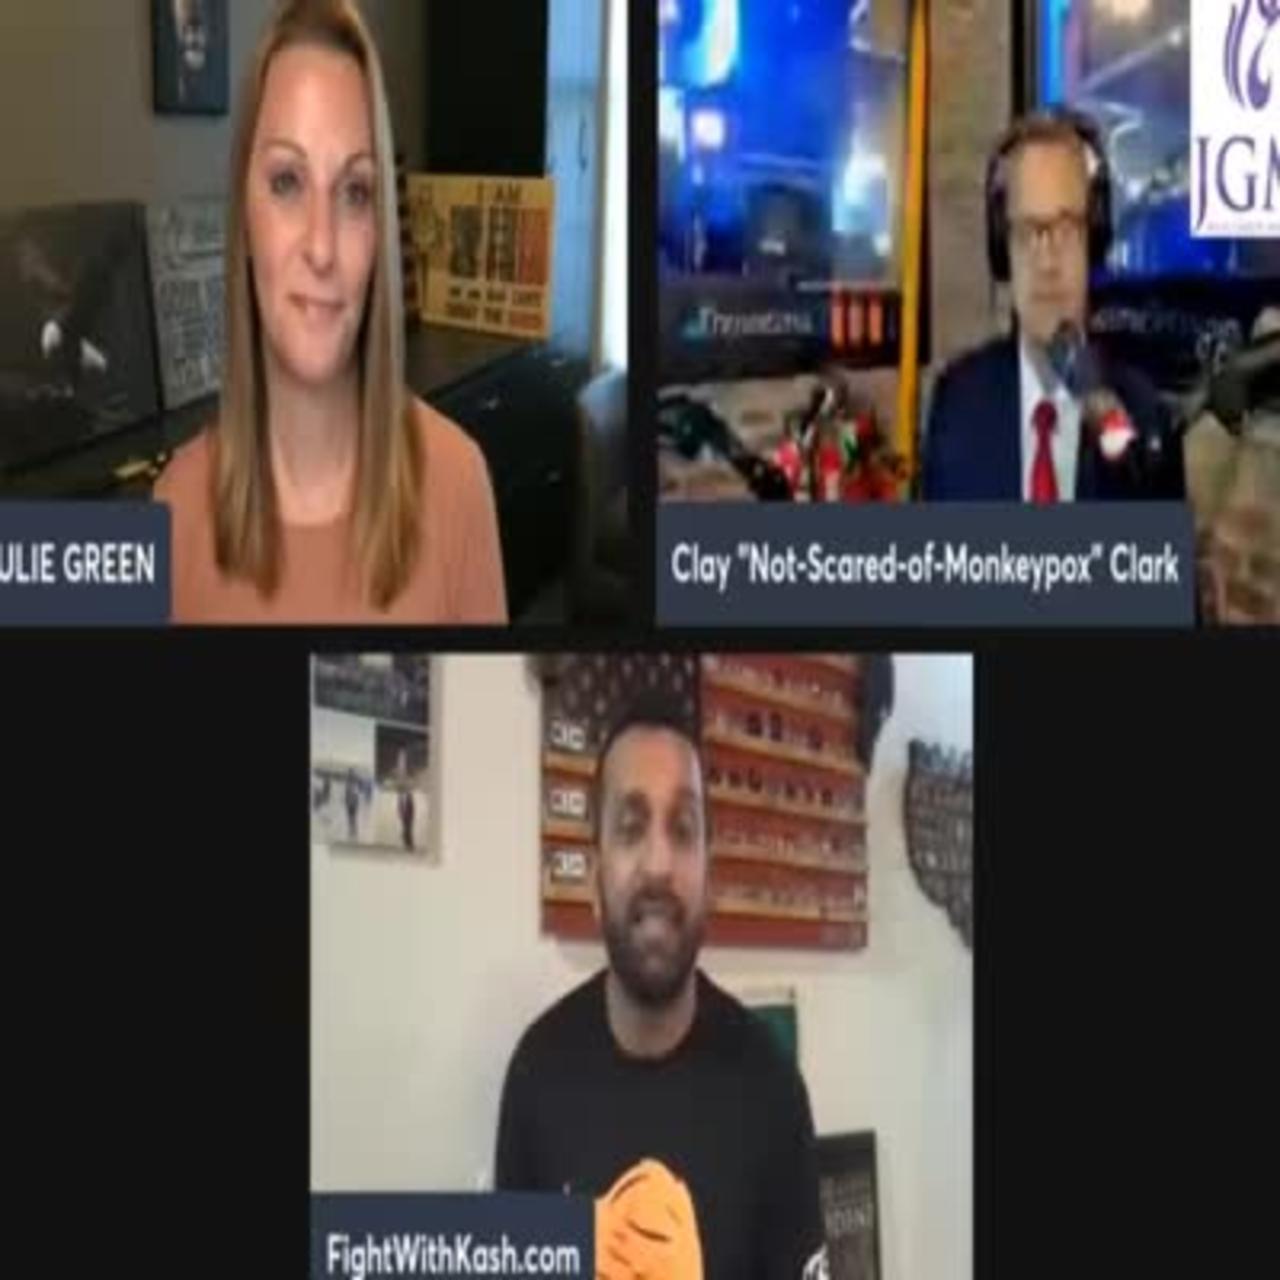 KASH PATEL, CLAY CLARK AND JULIE GREEN 09.22 |BREAKING NEWS 09/27/2022